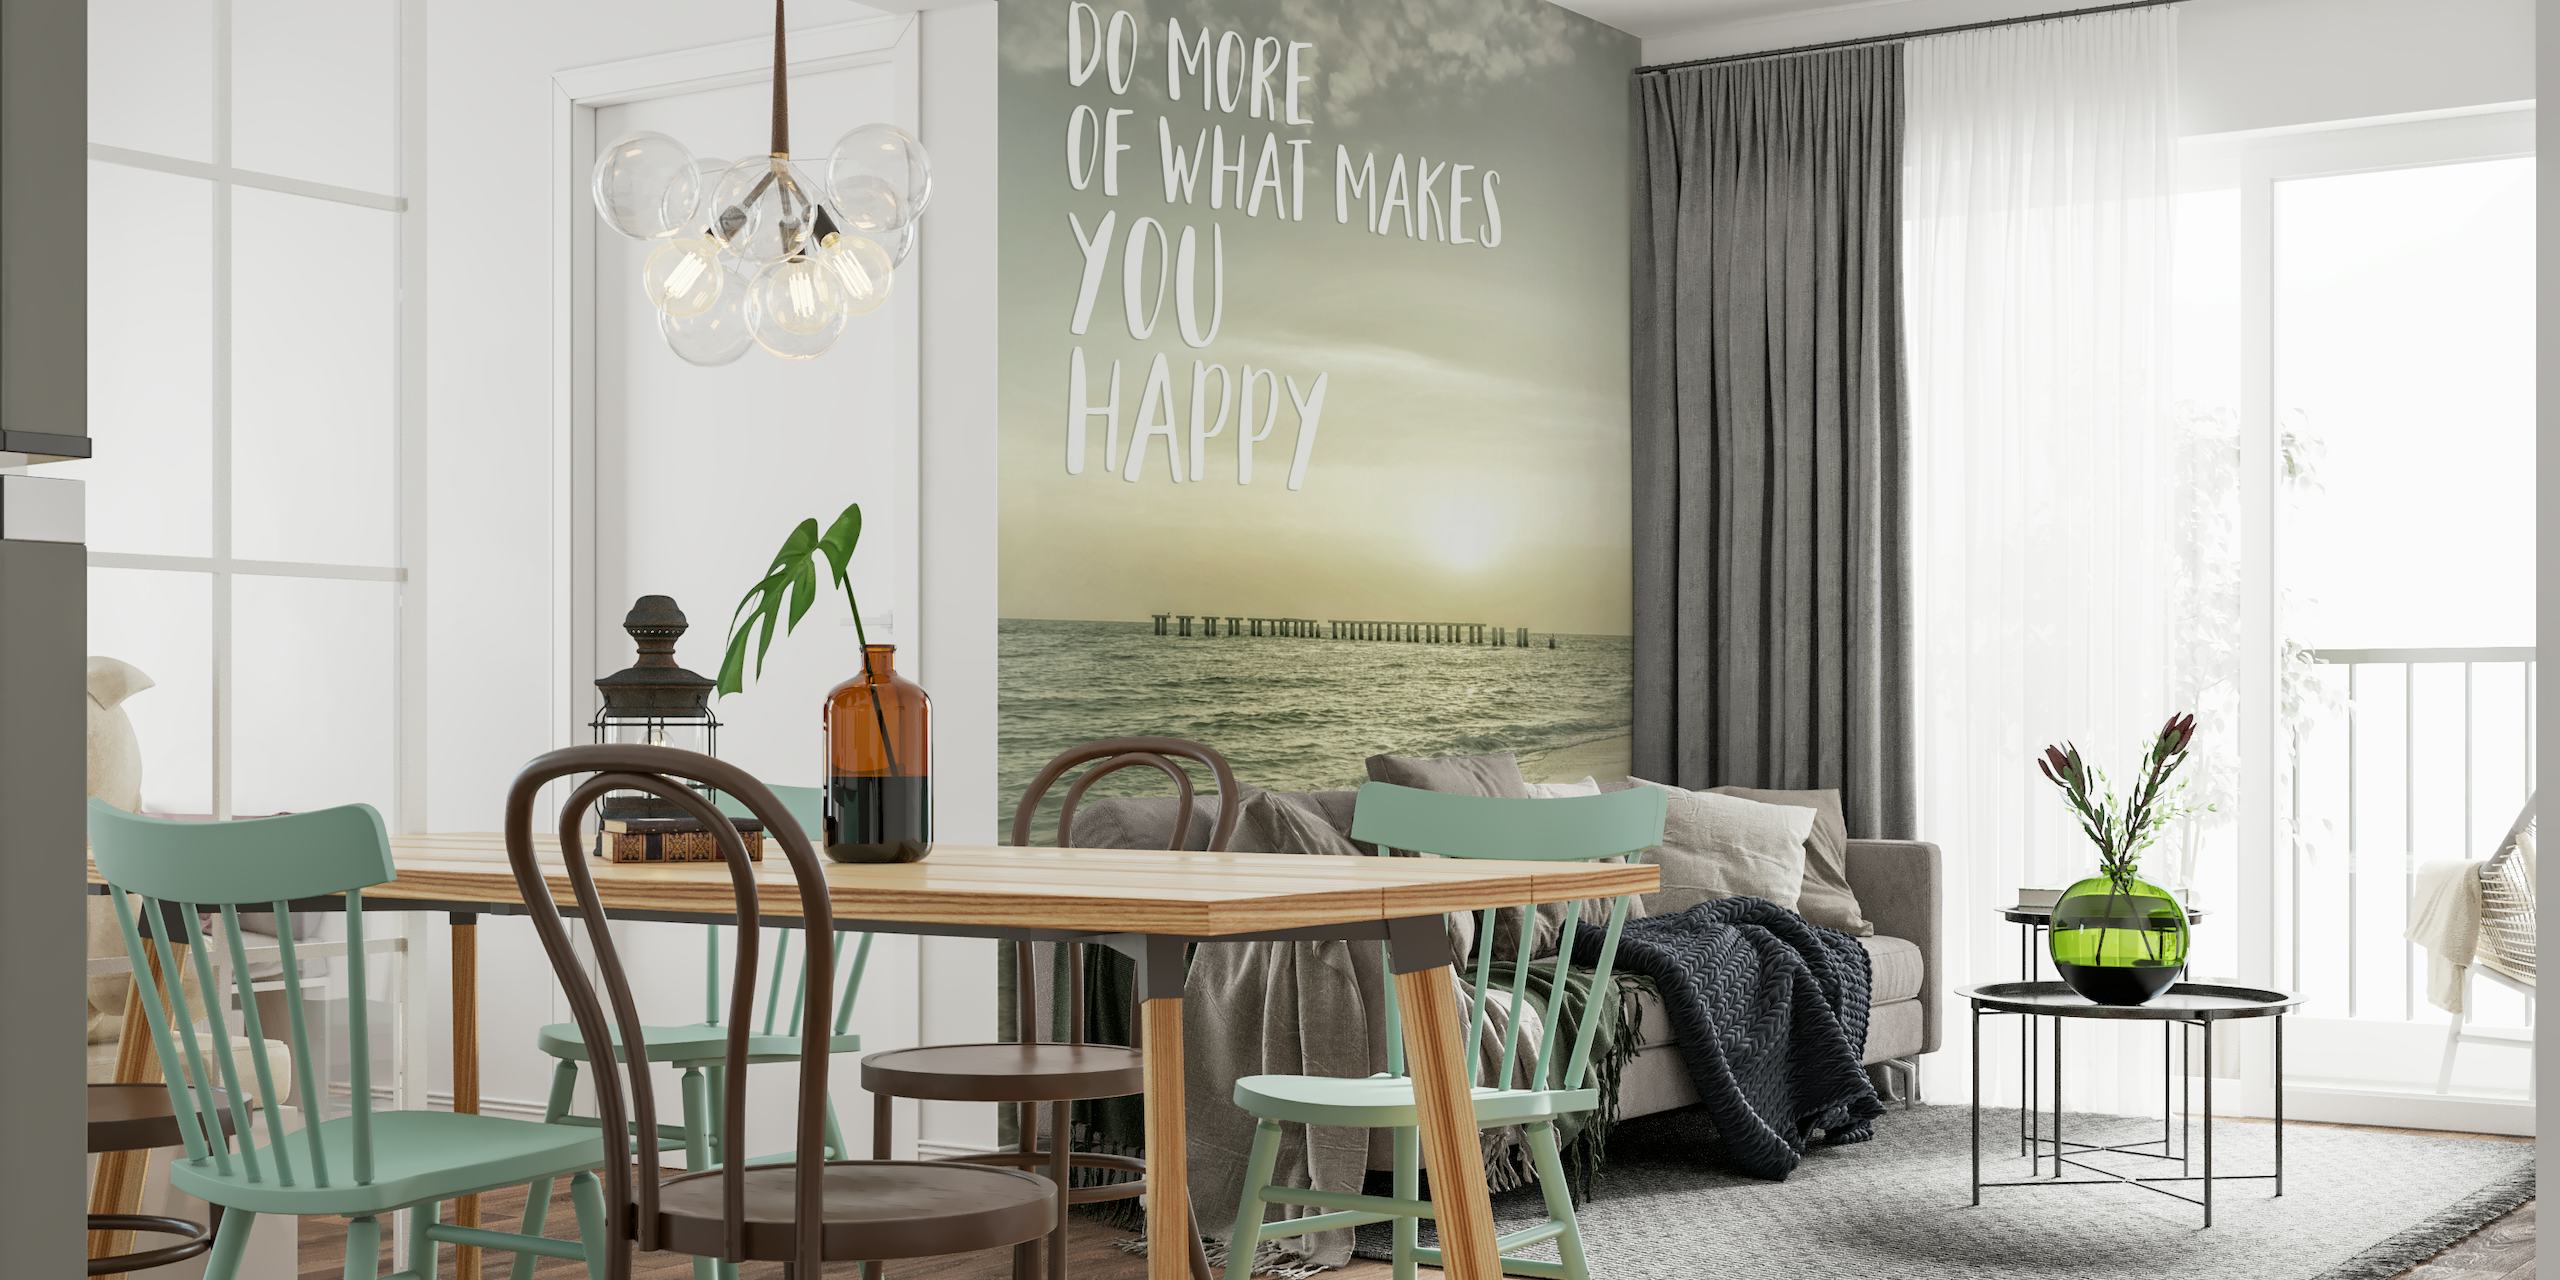 Do more of what makes you happy | Sunset tapete